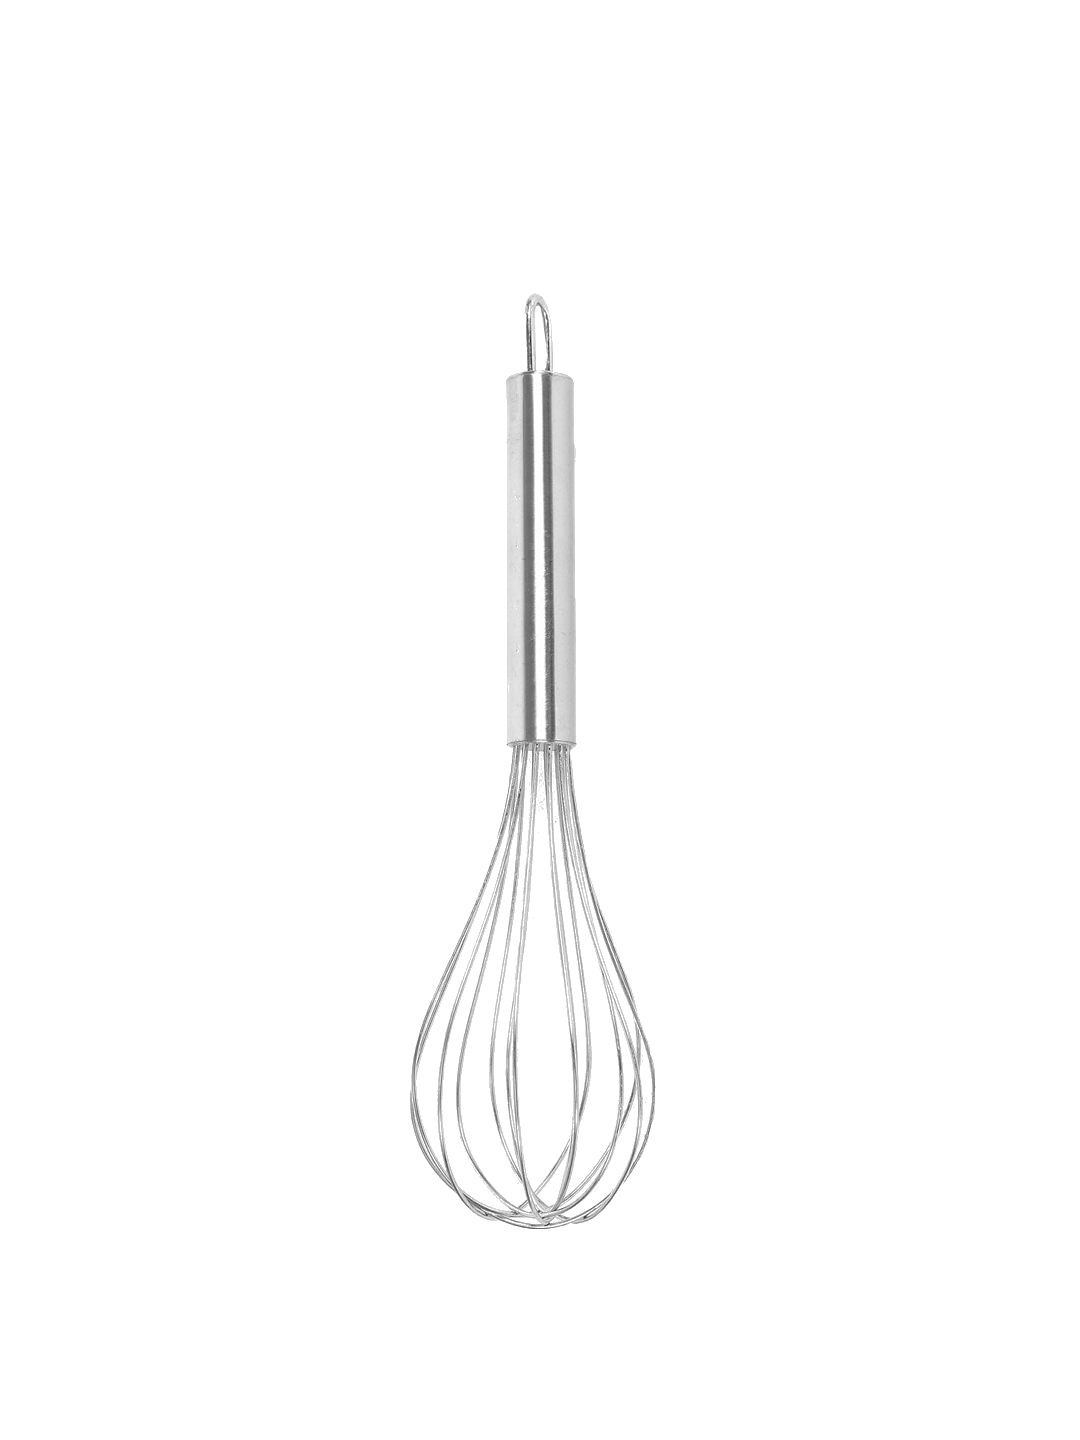 Athome by Nilkamal Grey Solid Stainless Steel Whisk Pipe Handle Price in India